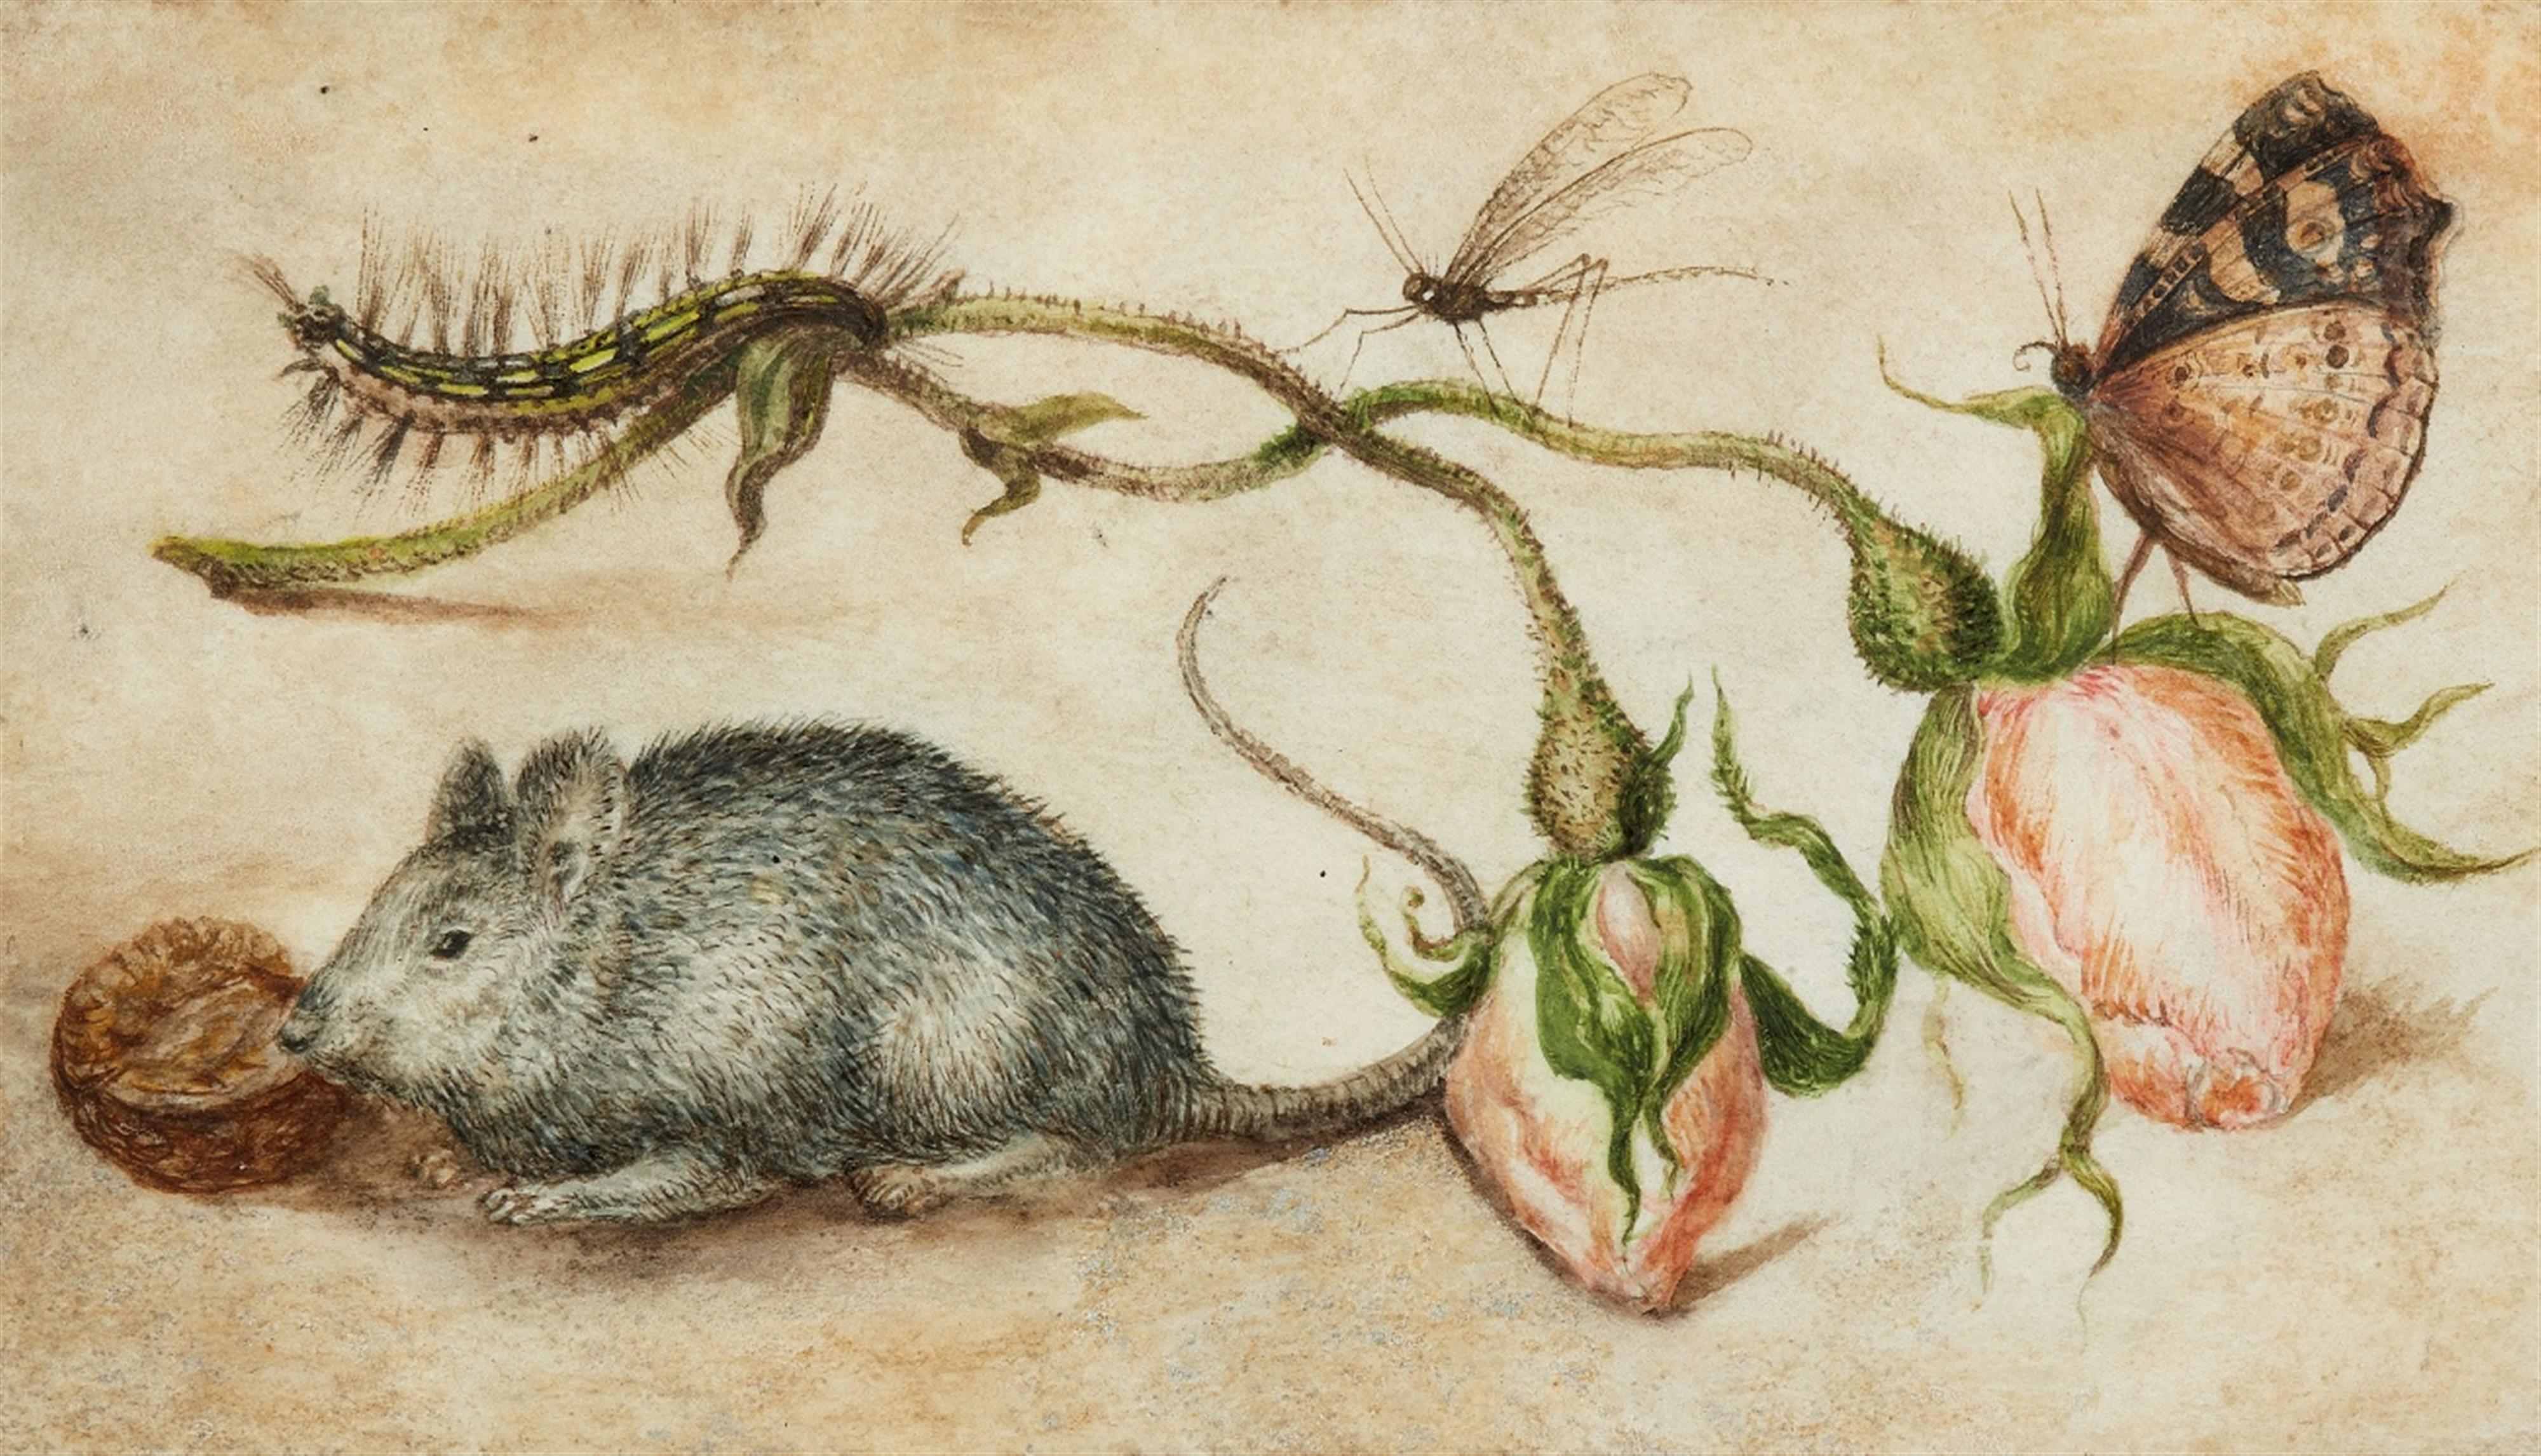 Jan Brueghel the Elder, attributed to - A Mouse, Caterpillar, Dragonfly, Butterfly, and two Rosebuds - image-1